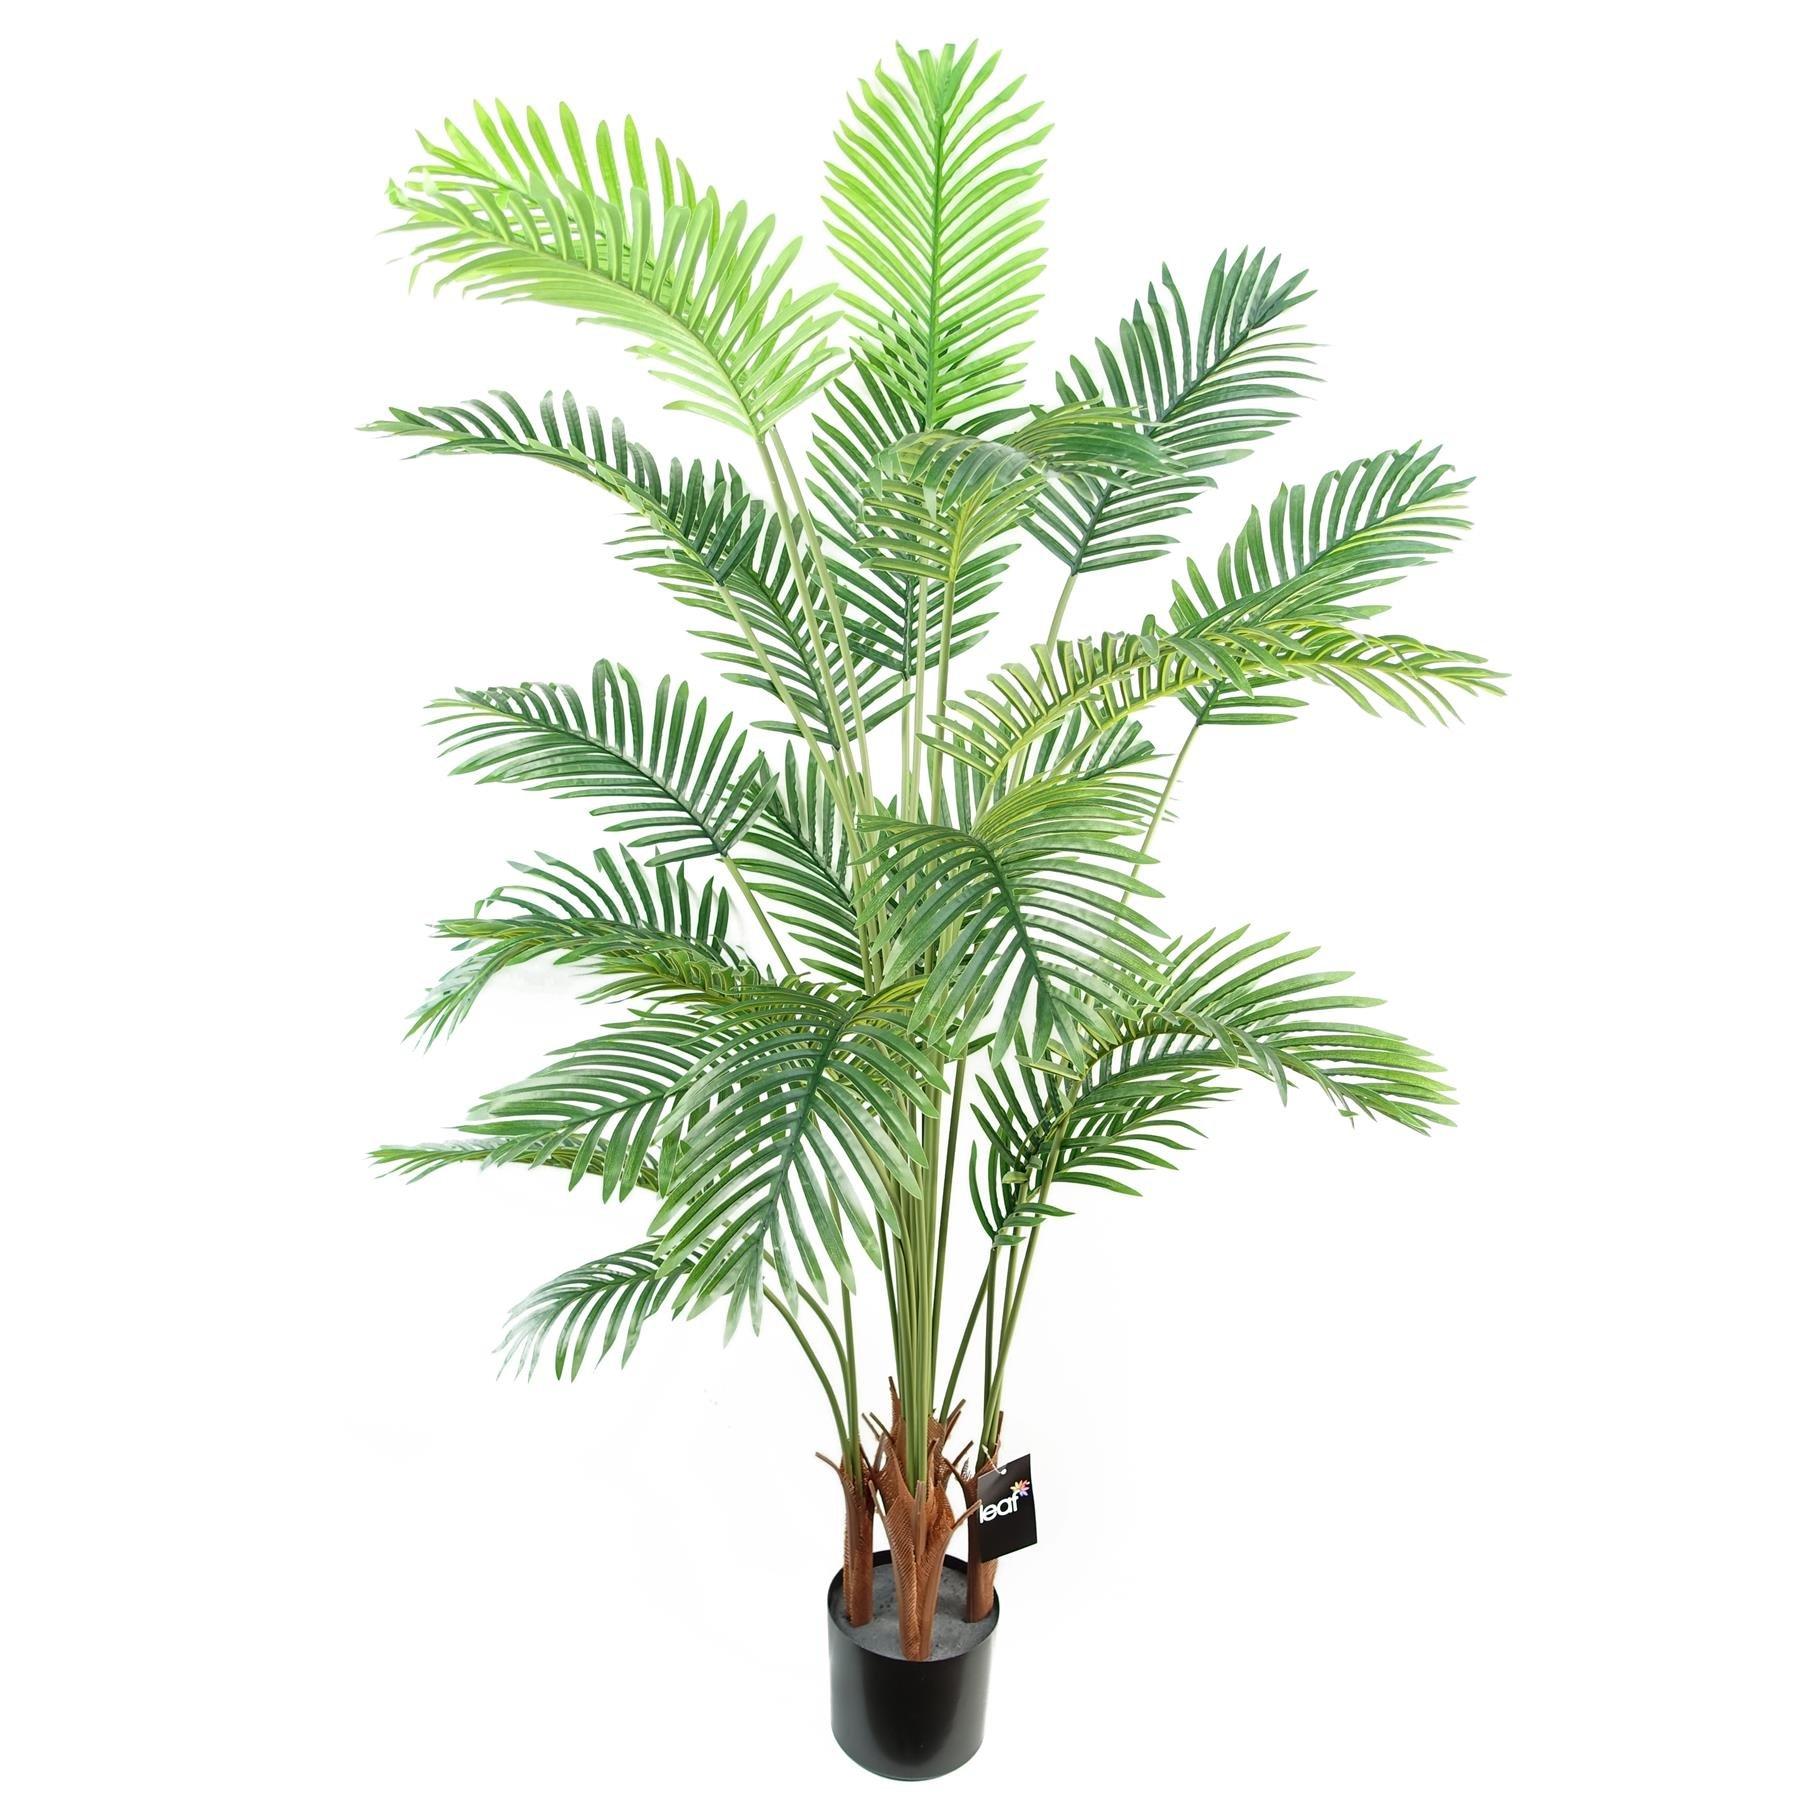 150cm Artificial Areca Palm Tree Potted in Black Pot